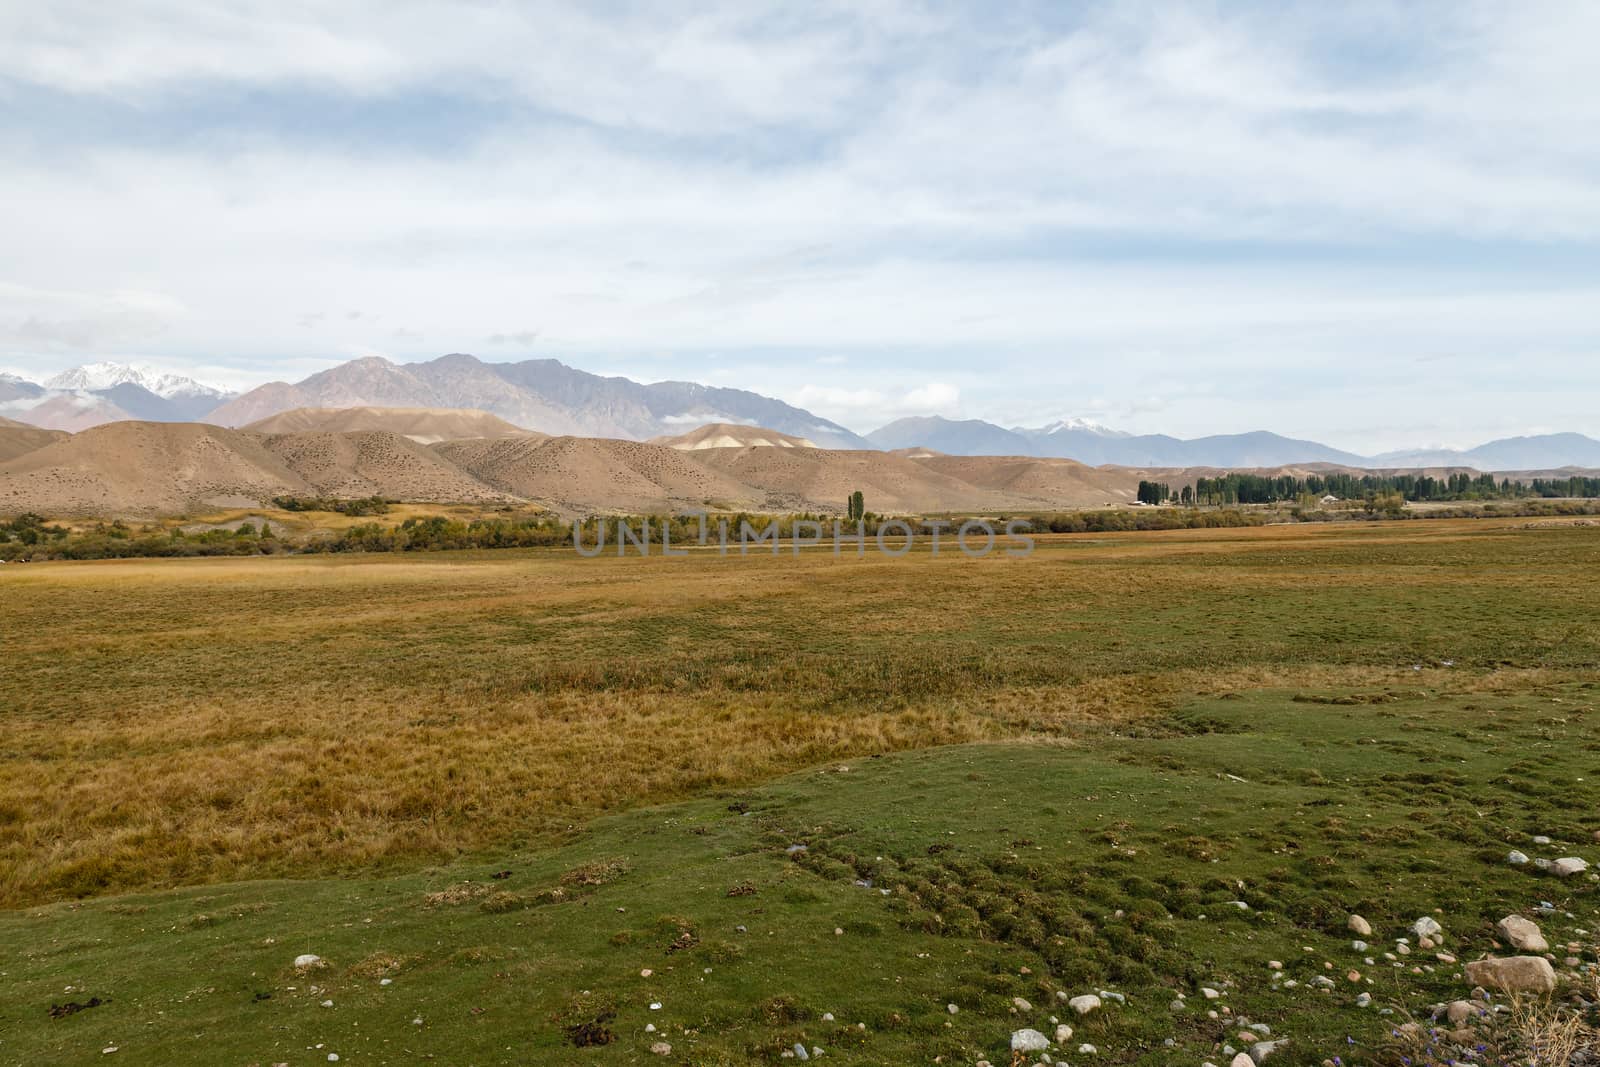 mountain landscape in central asia, Jumgal District, kyrgyzstan